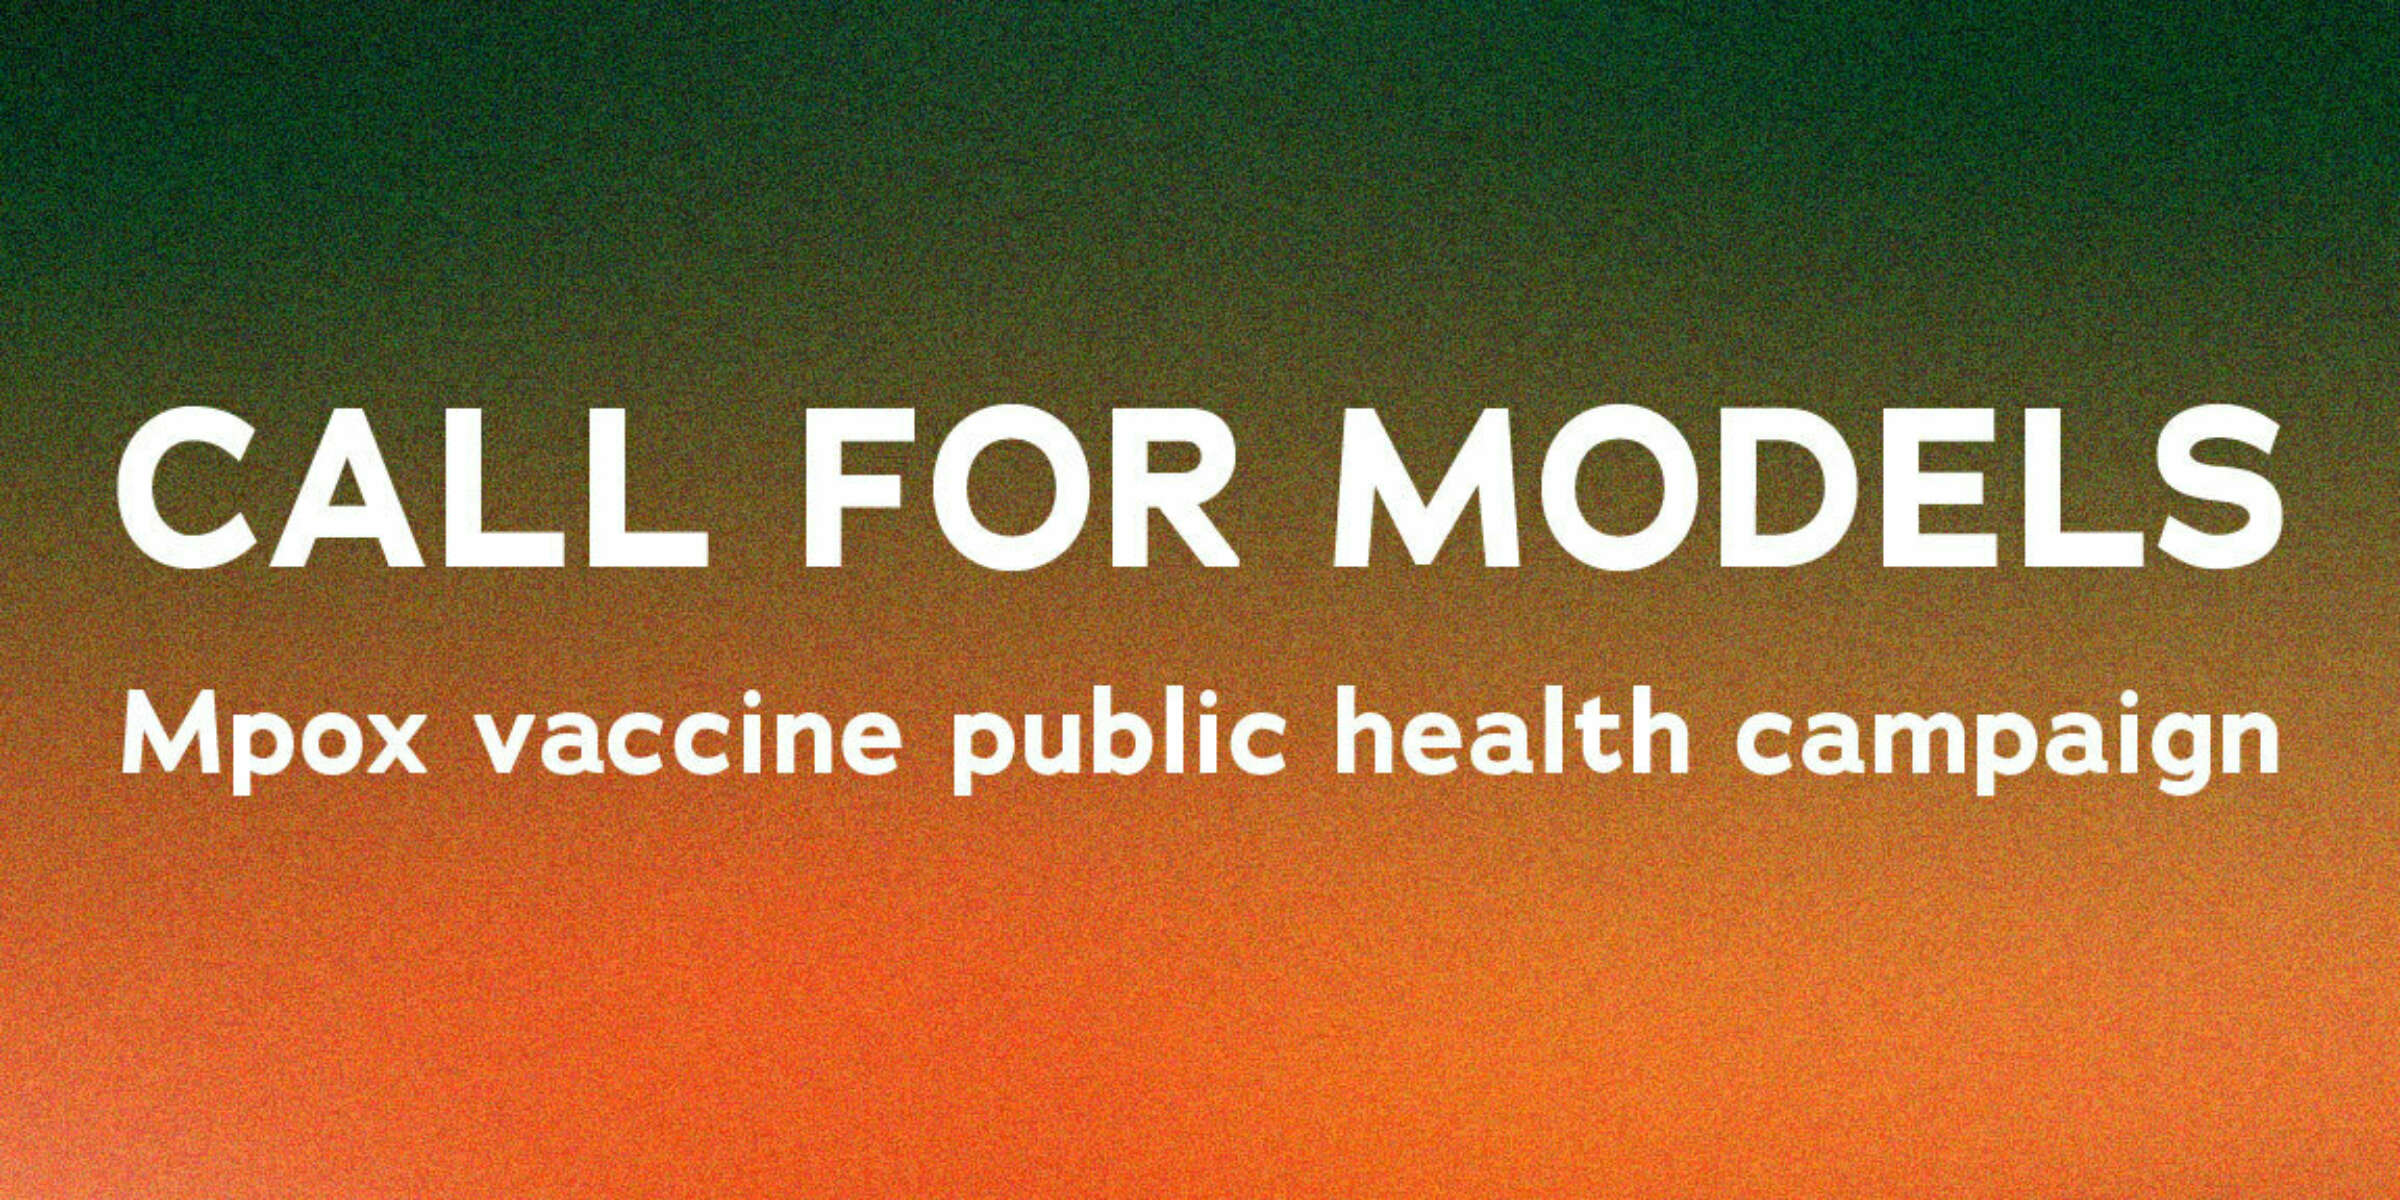 Text reading "CALL FOR MODELS Mpox vaccine public health campaign" on a gradient background transitioning from dark green at the top to orange at the bottom.